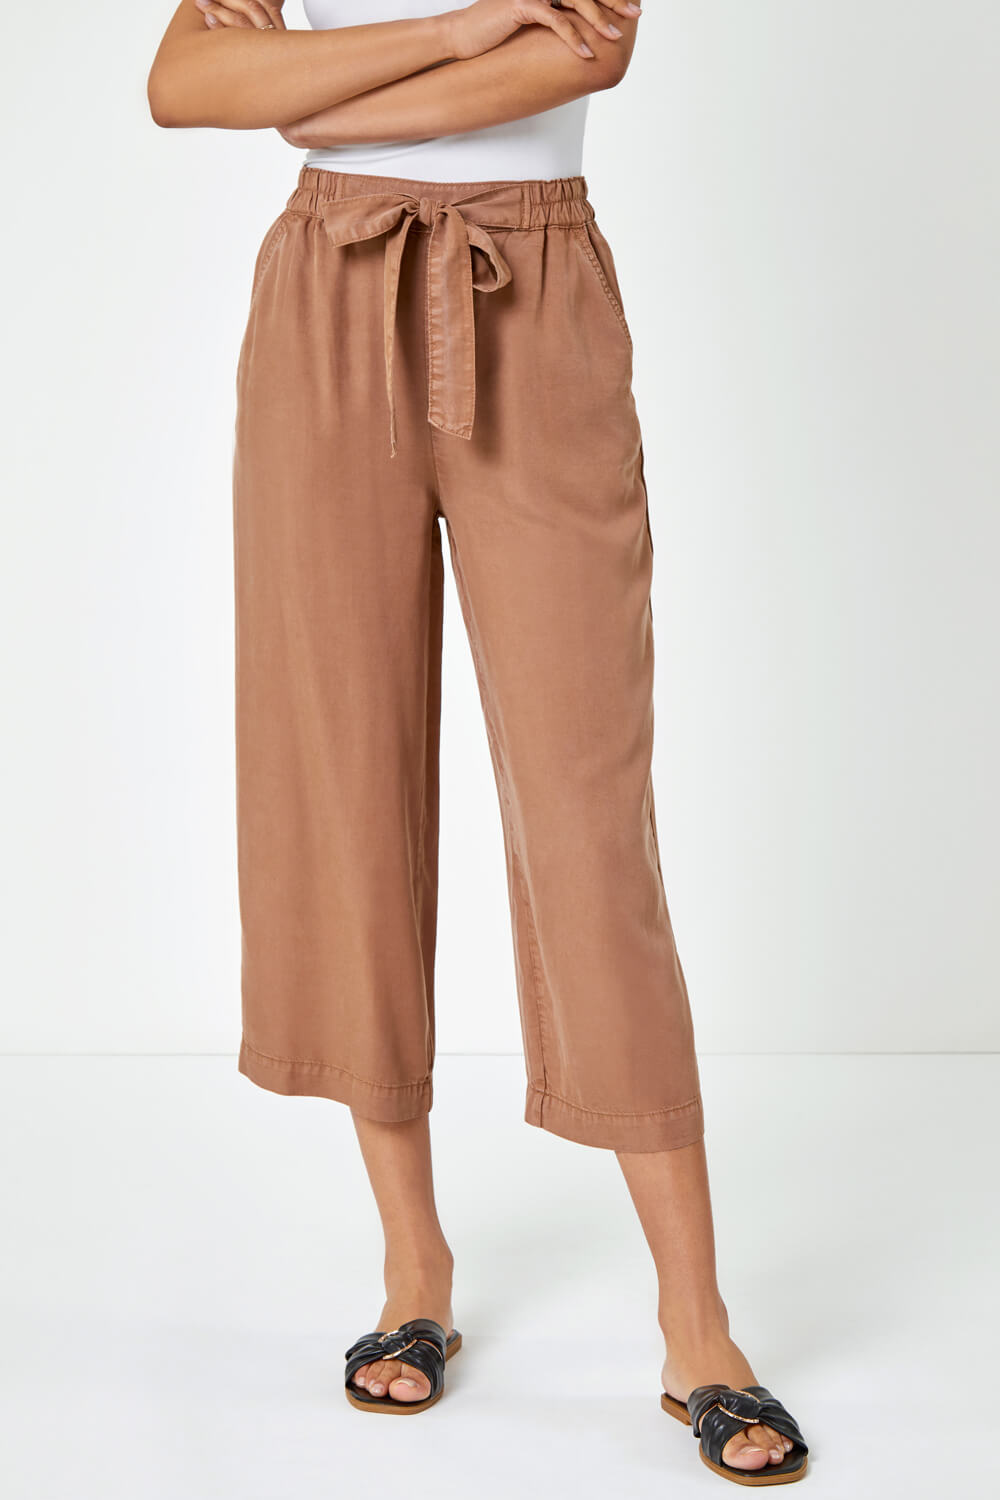 Tan Tie Detail Stretch Waist Culottes, Image 4 of 5